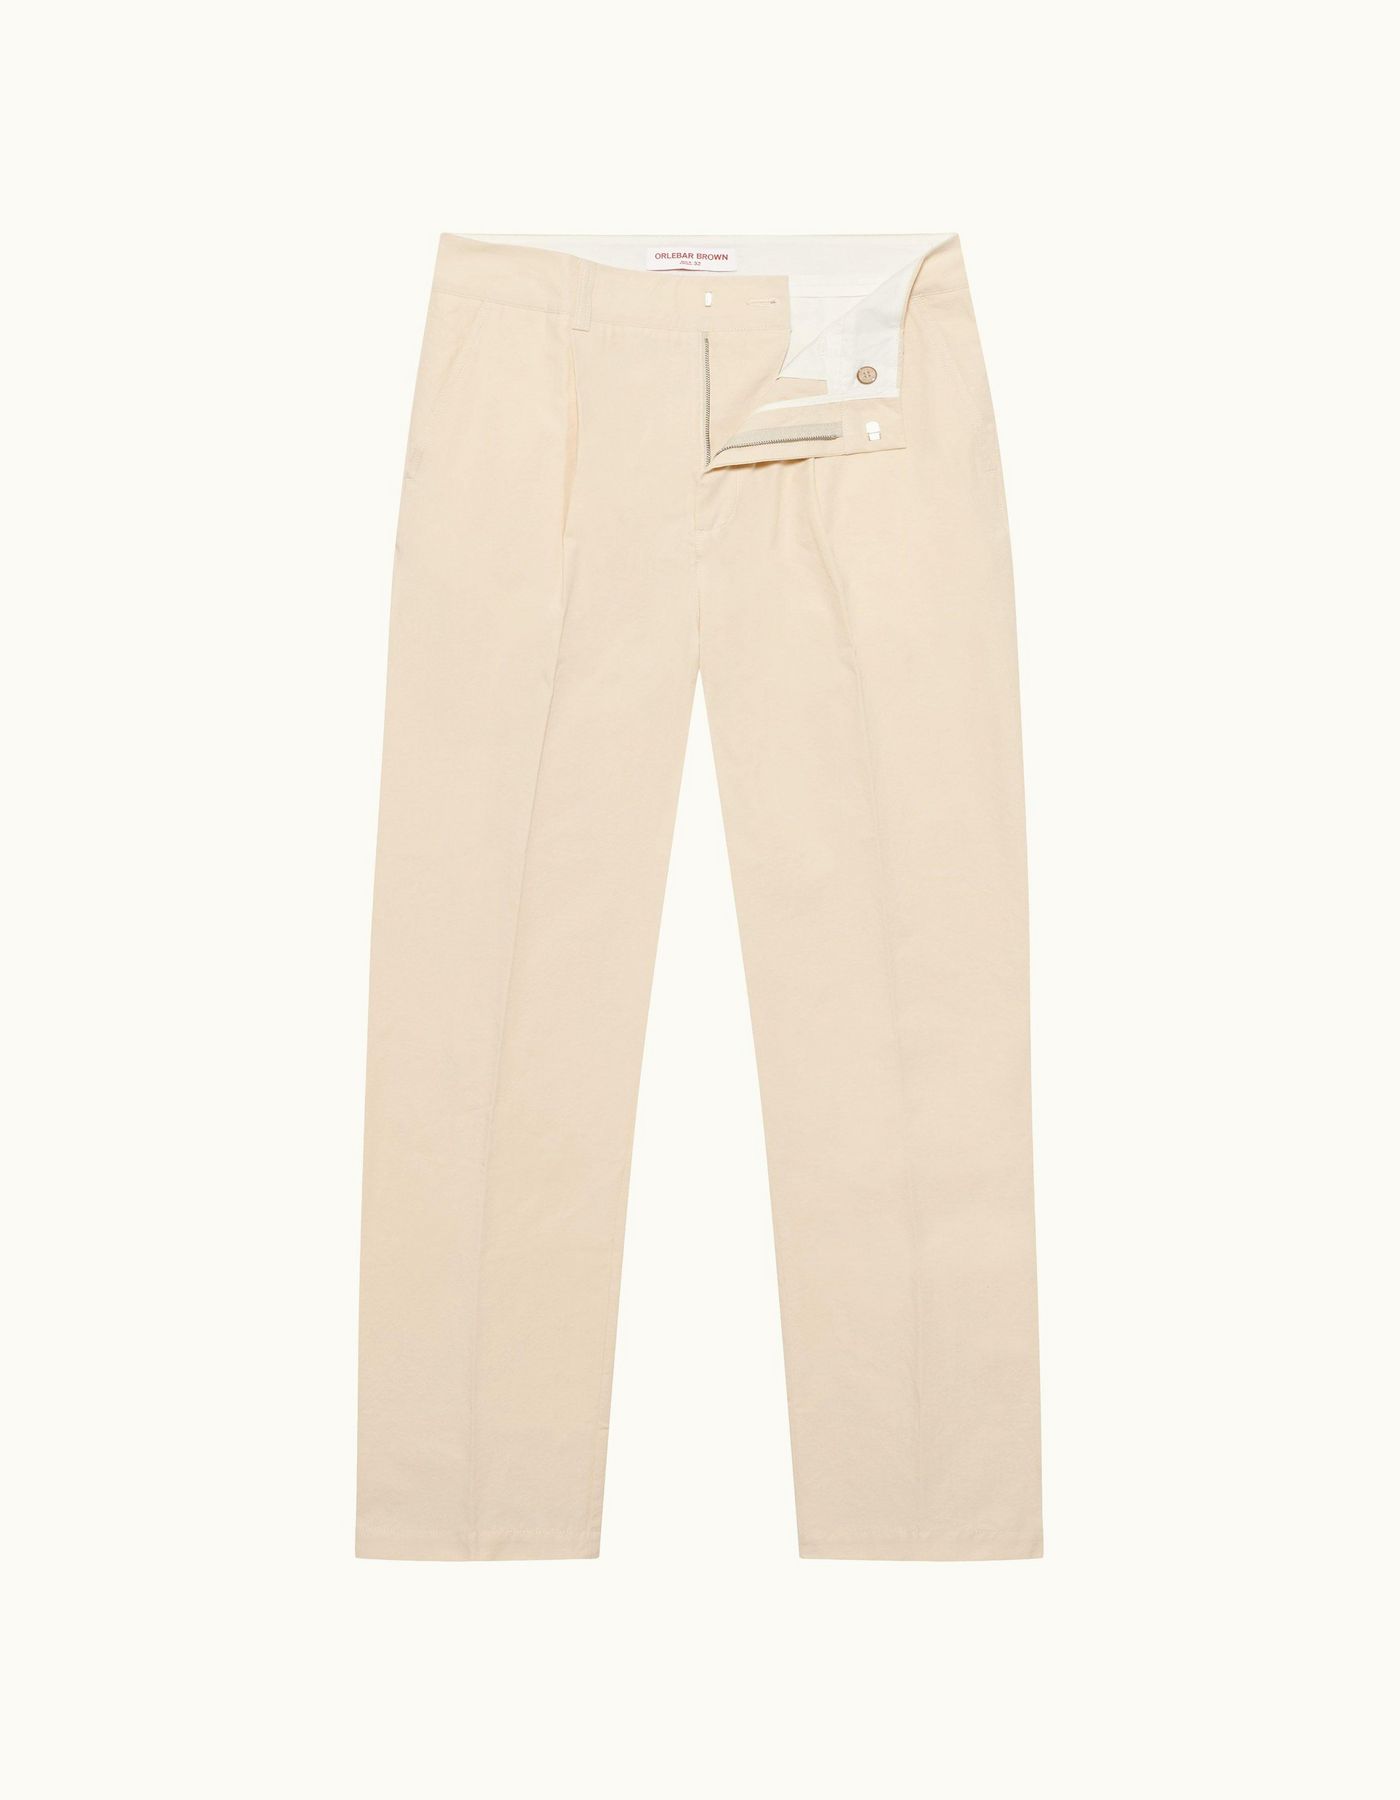 Beckworth Pleated - Mens Pebble Easy Fit Single Pleat Laundered Cotton Trousers